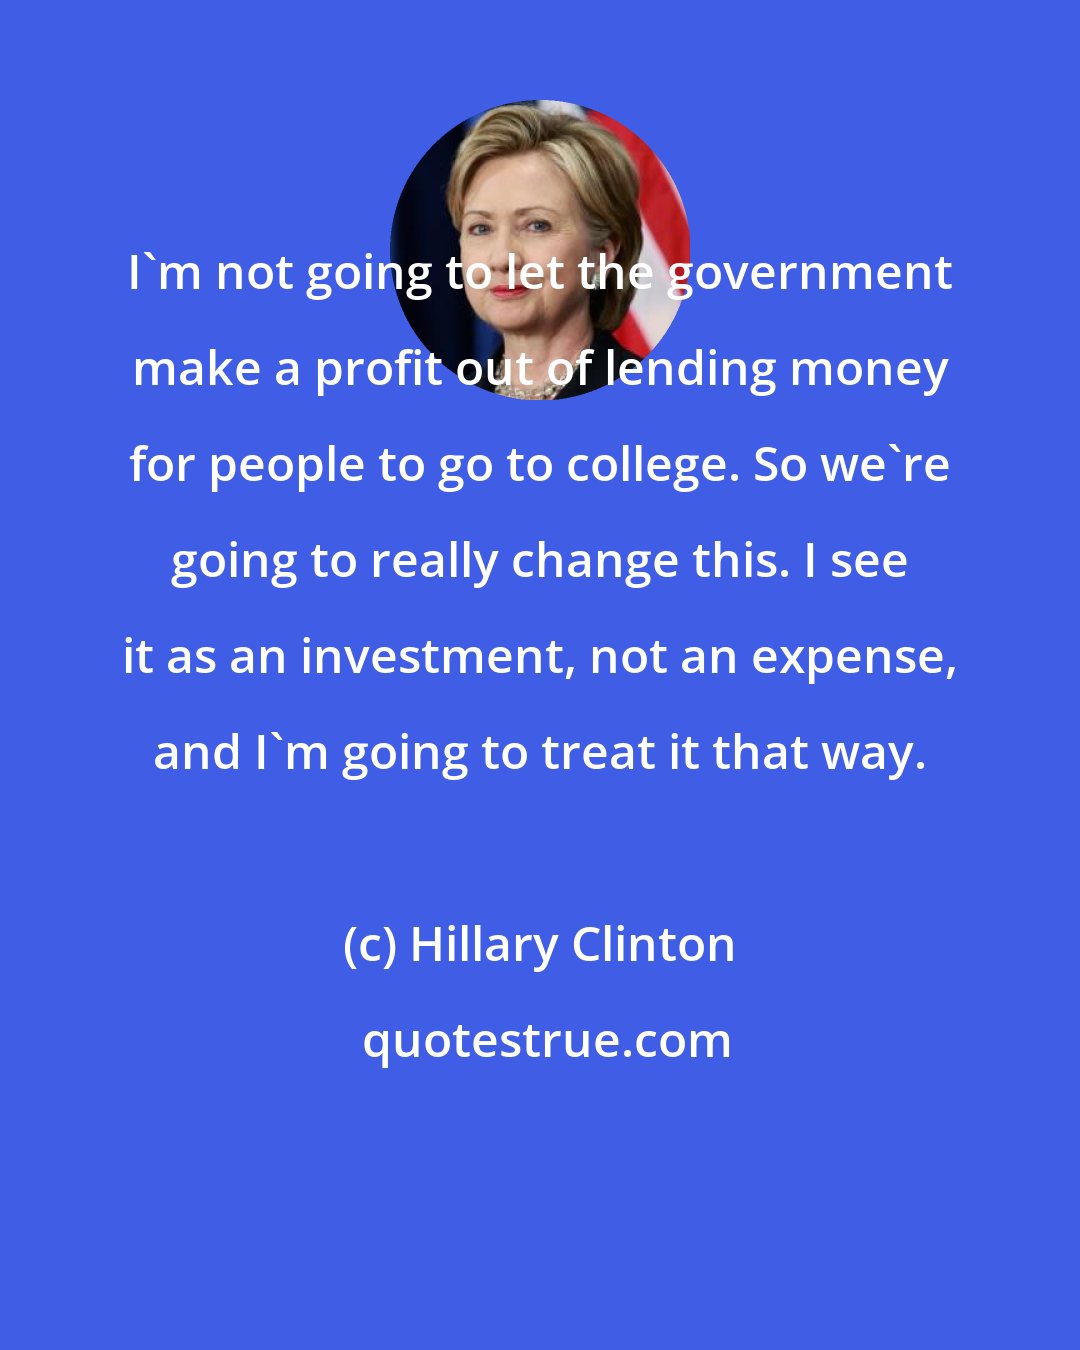 Hillary Clinton: I'm not going to let the government make a profit out of lending money for people to go to college. So we're going to really change this. I see it as an investment, not an expense, and I'm going to treat it that way.